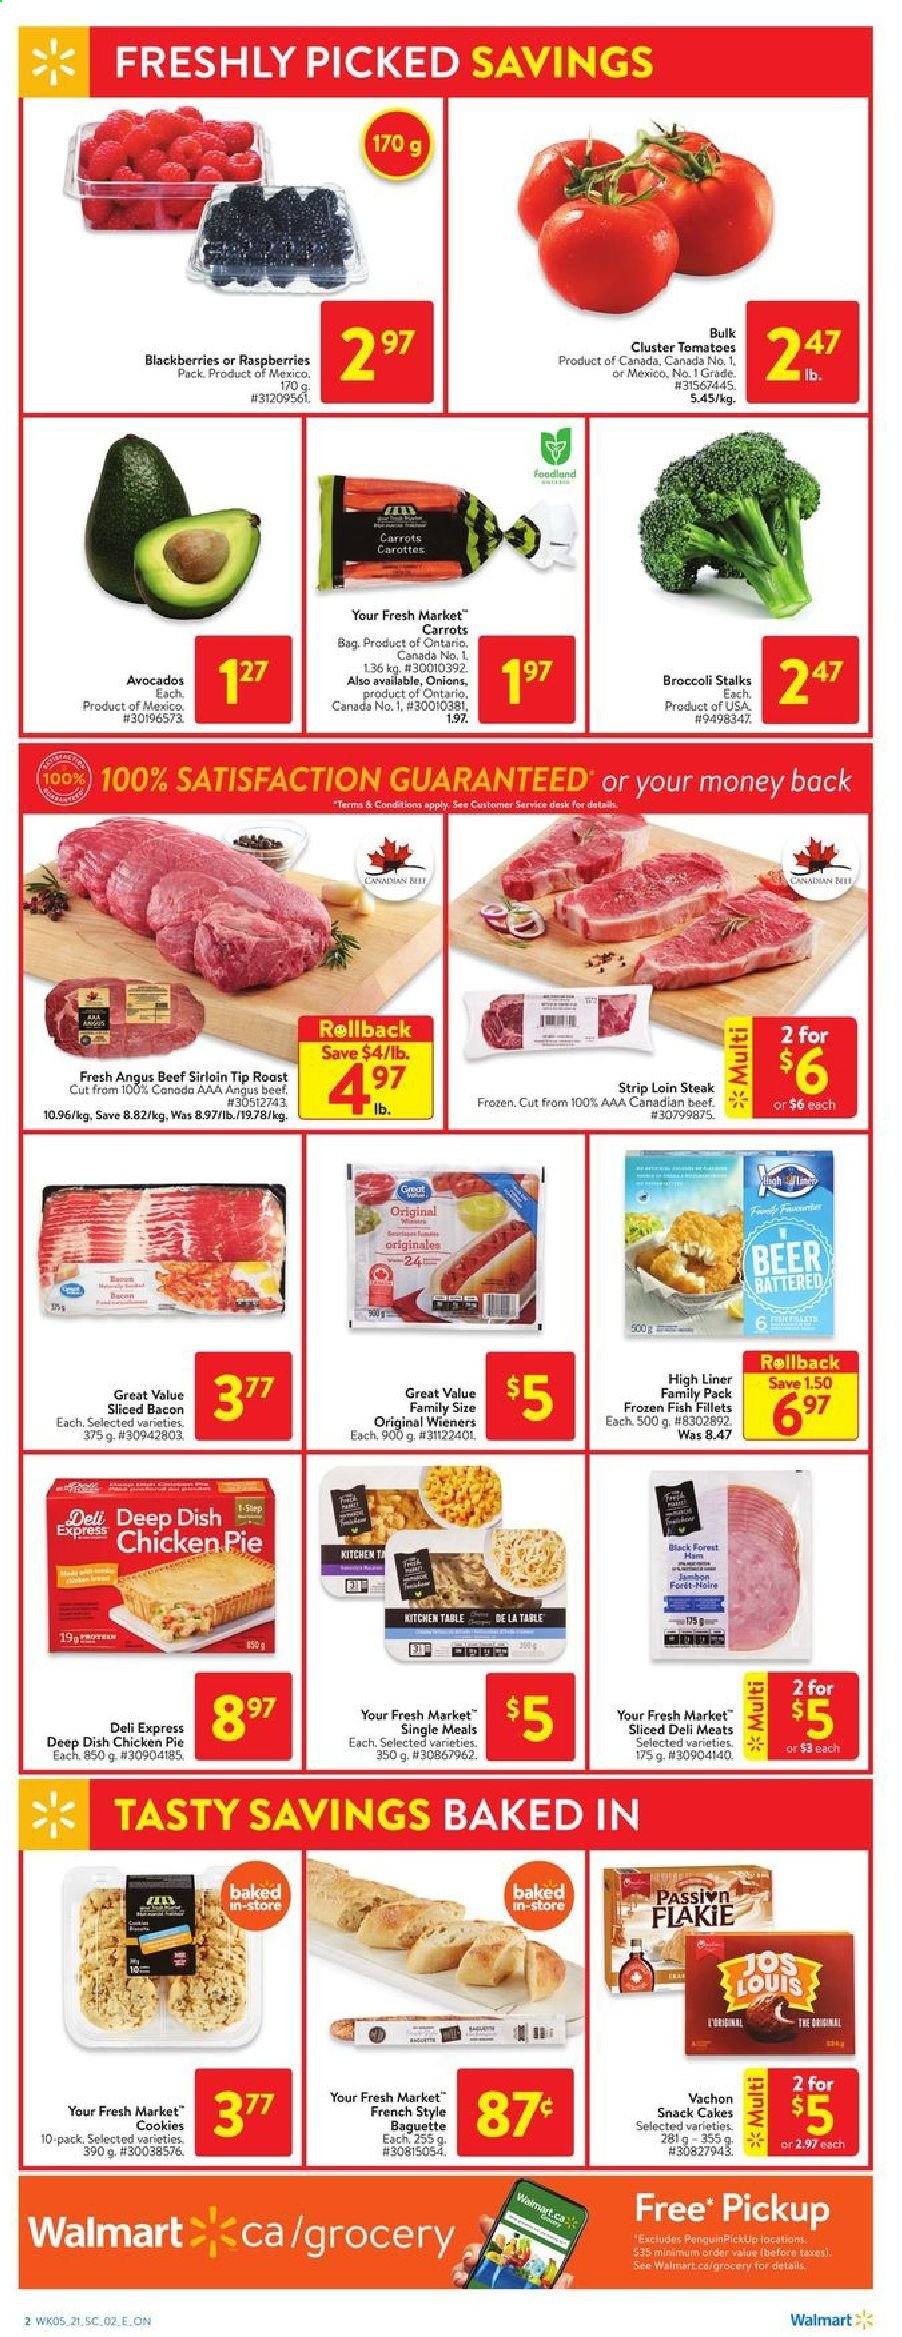 Walmart flyer  - February 25, 2021 - March 03, 2021. Page 2.